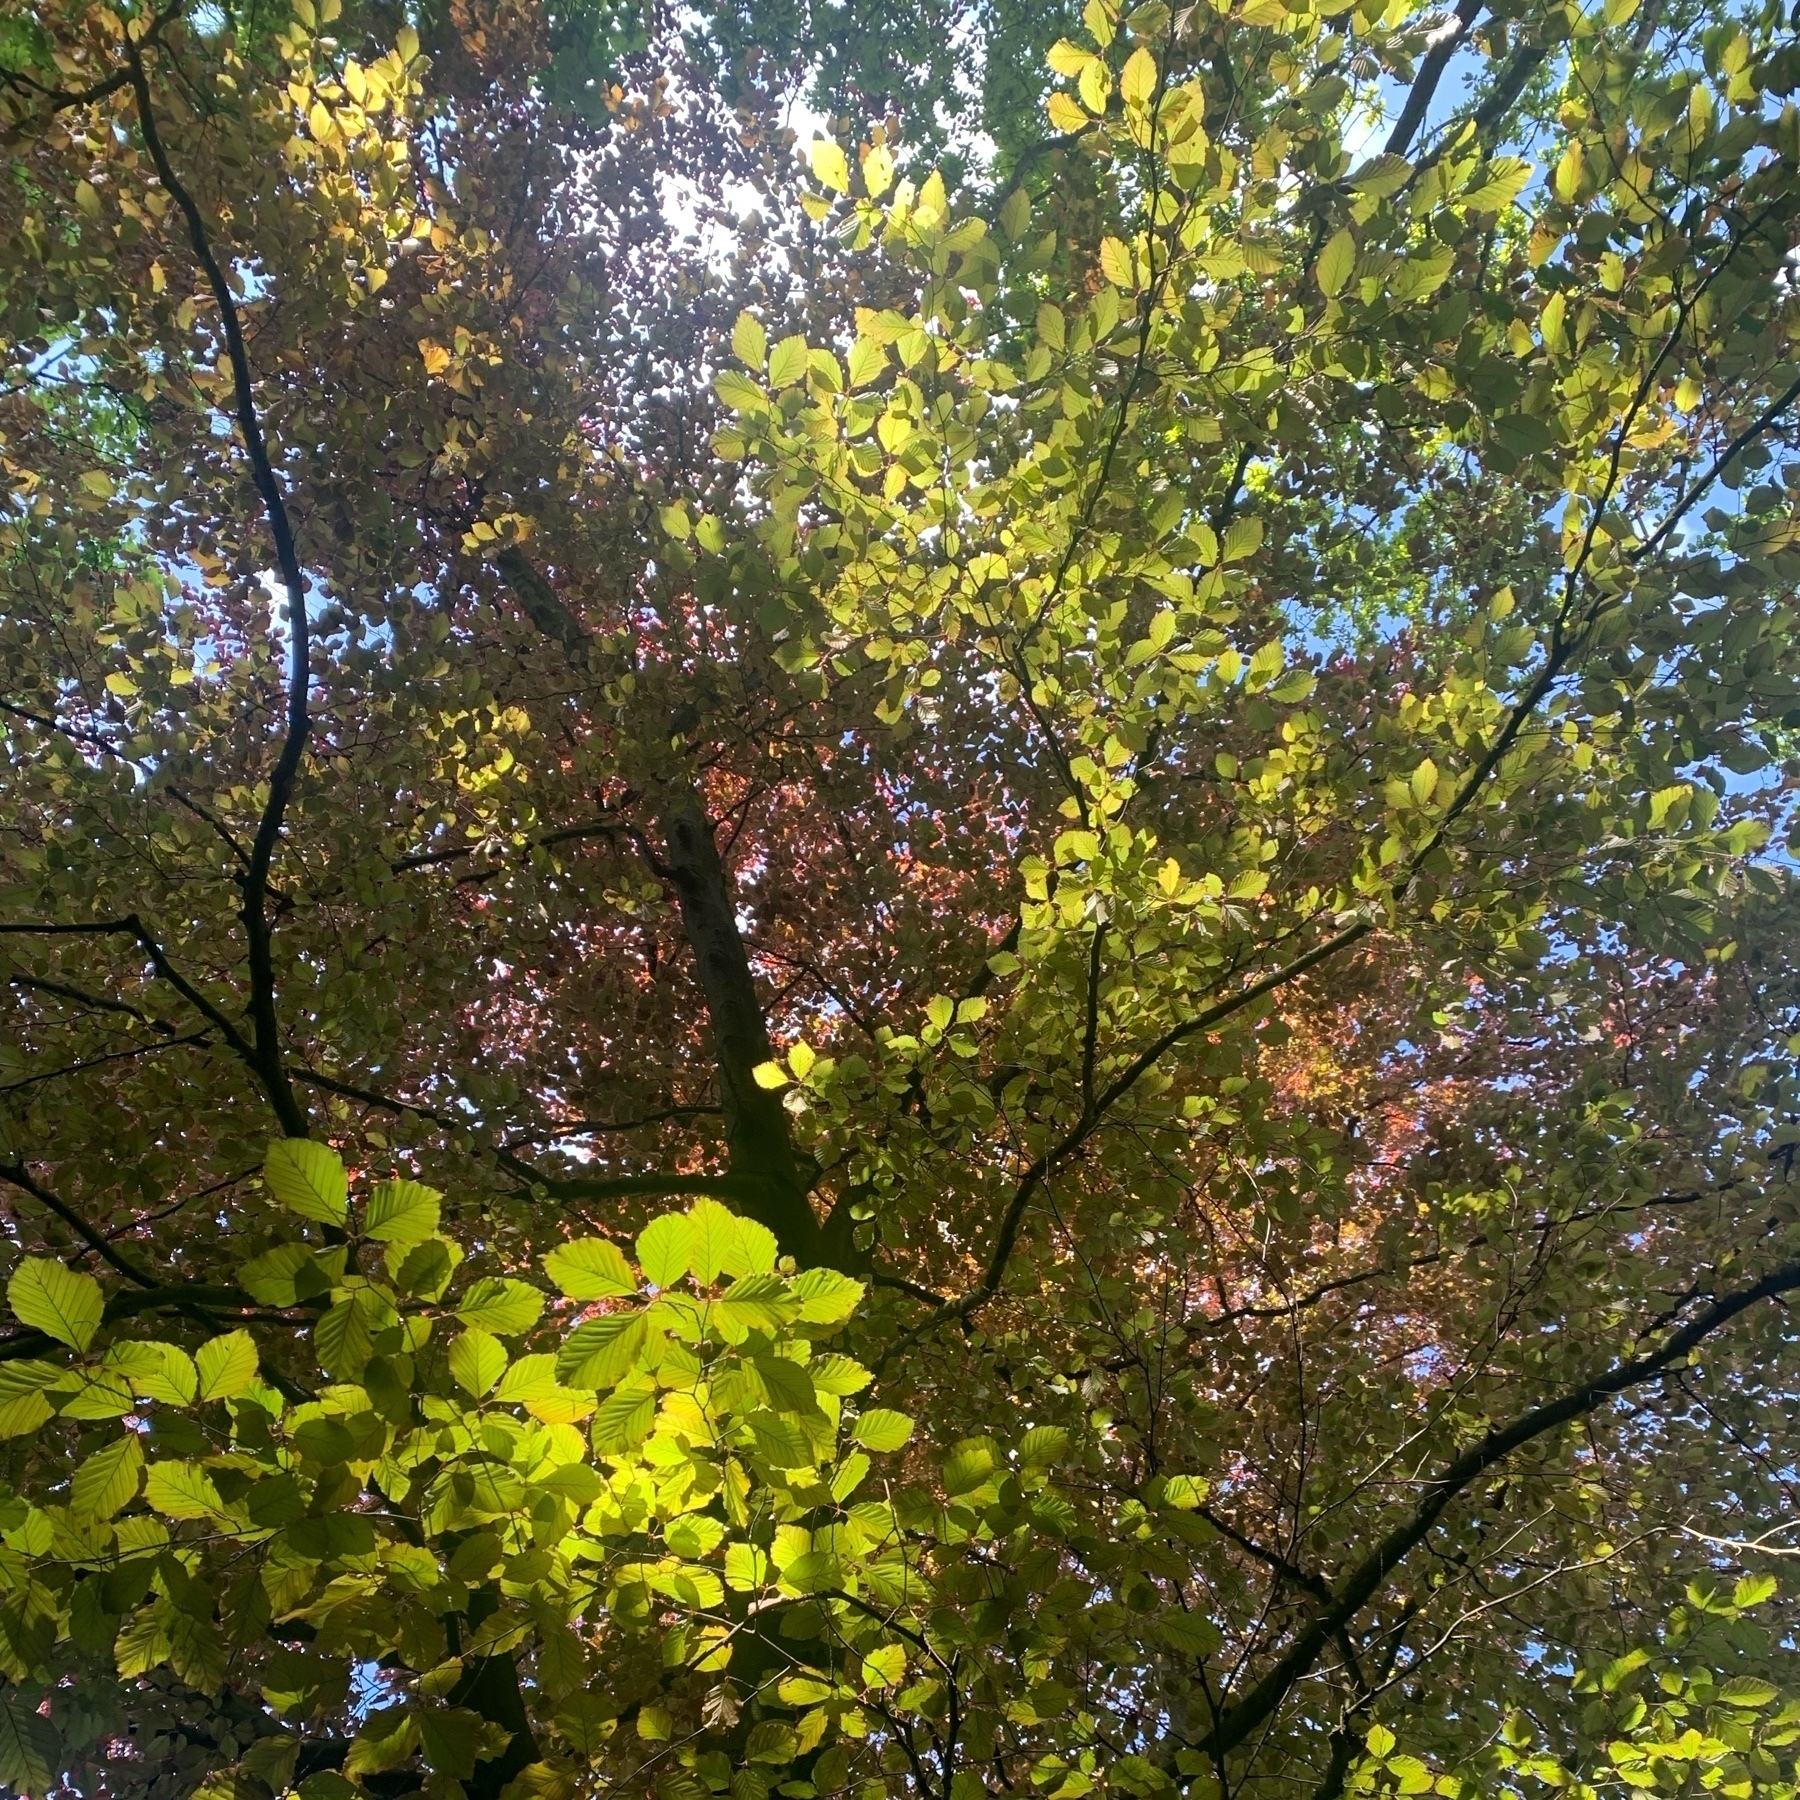 Camera looking upwards into canopy of multicoloured leaves overhead. Blue sky just visible through the gaps